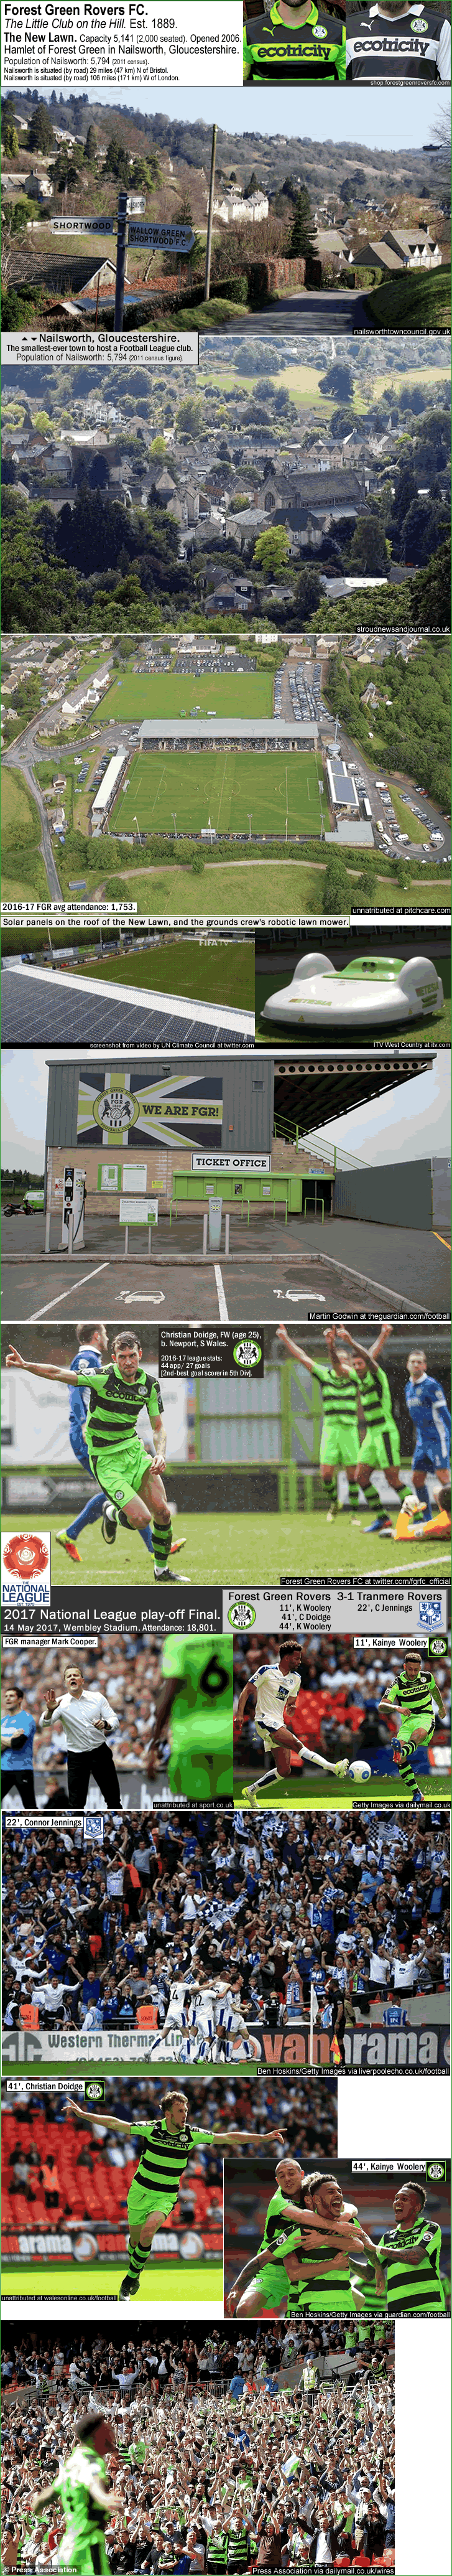 forest-green-rovers_promoted-2017_mark-cooper_christian-doidge_kainye-woolery_wembley_fgr_3-1_tranmere_d_.gif